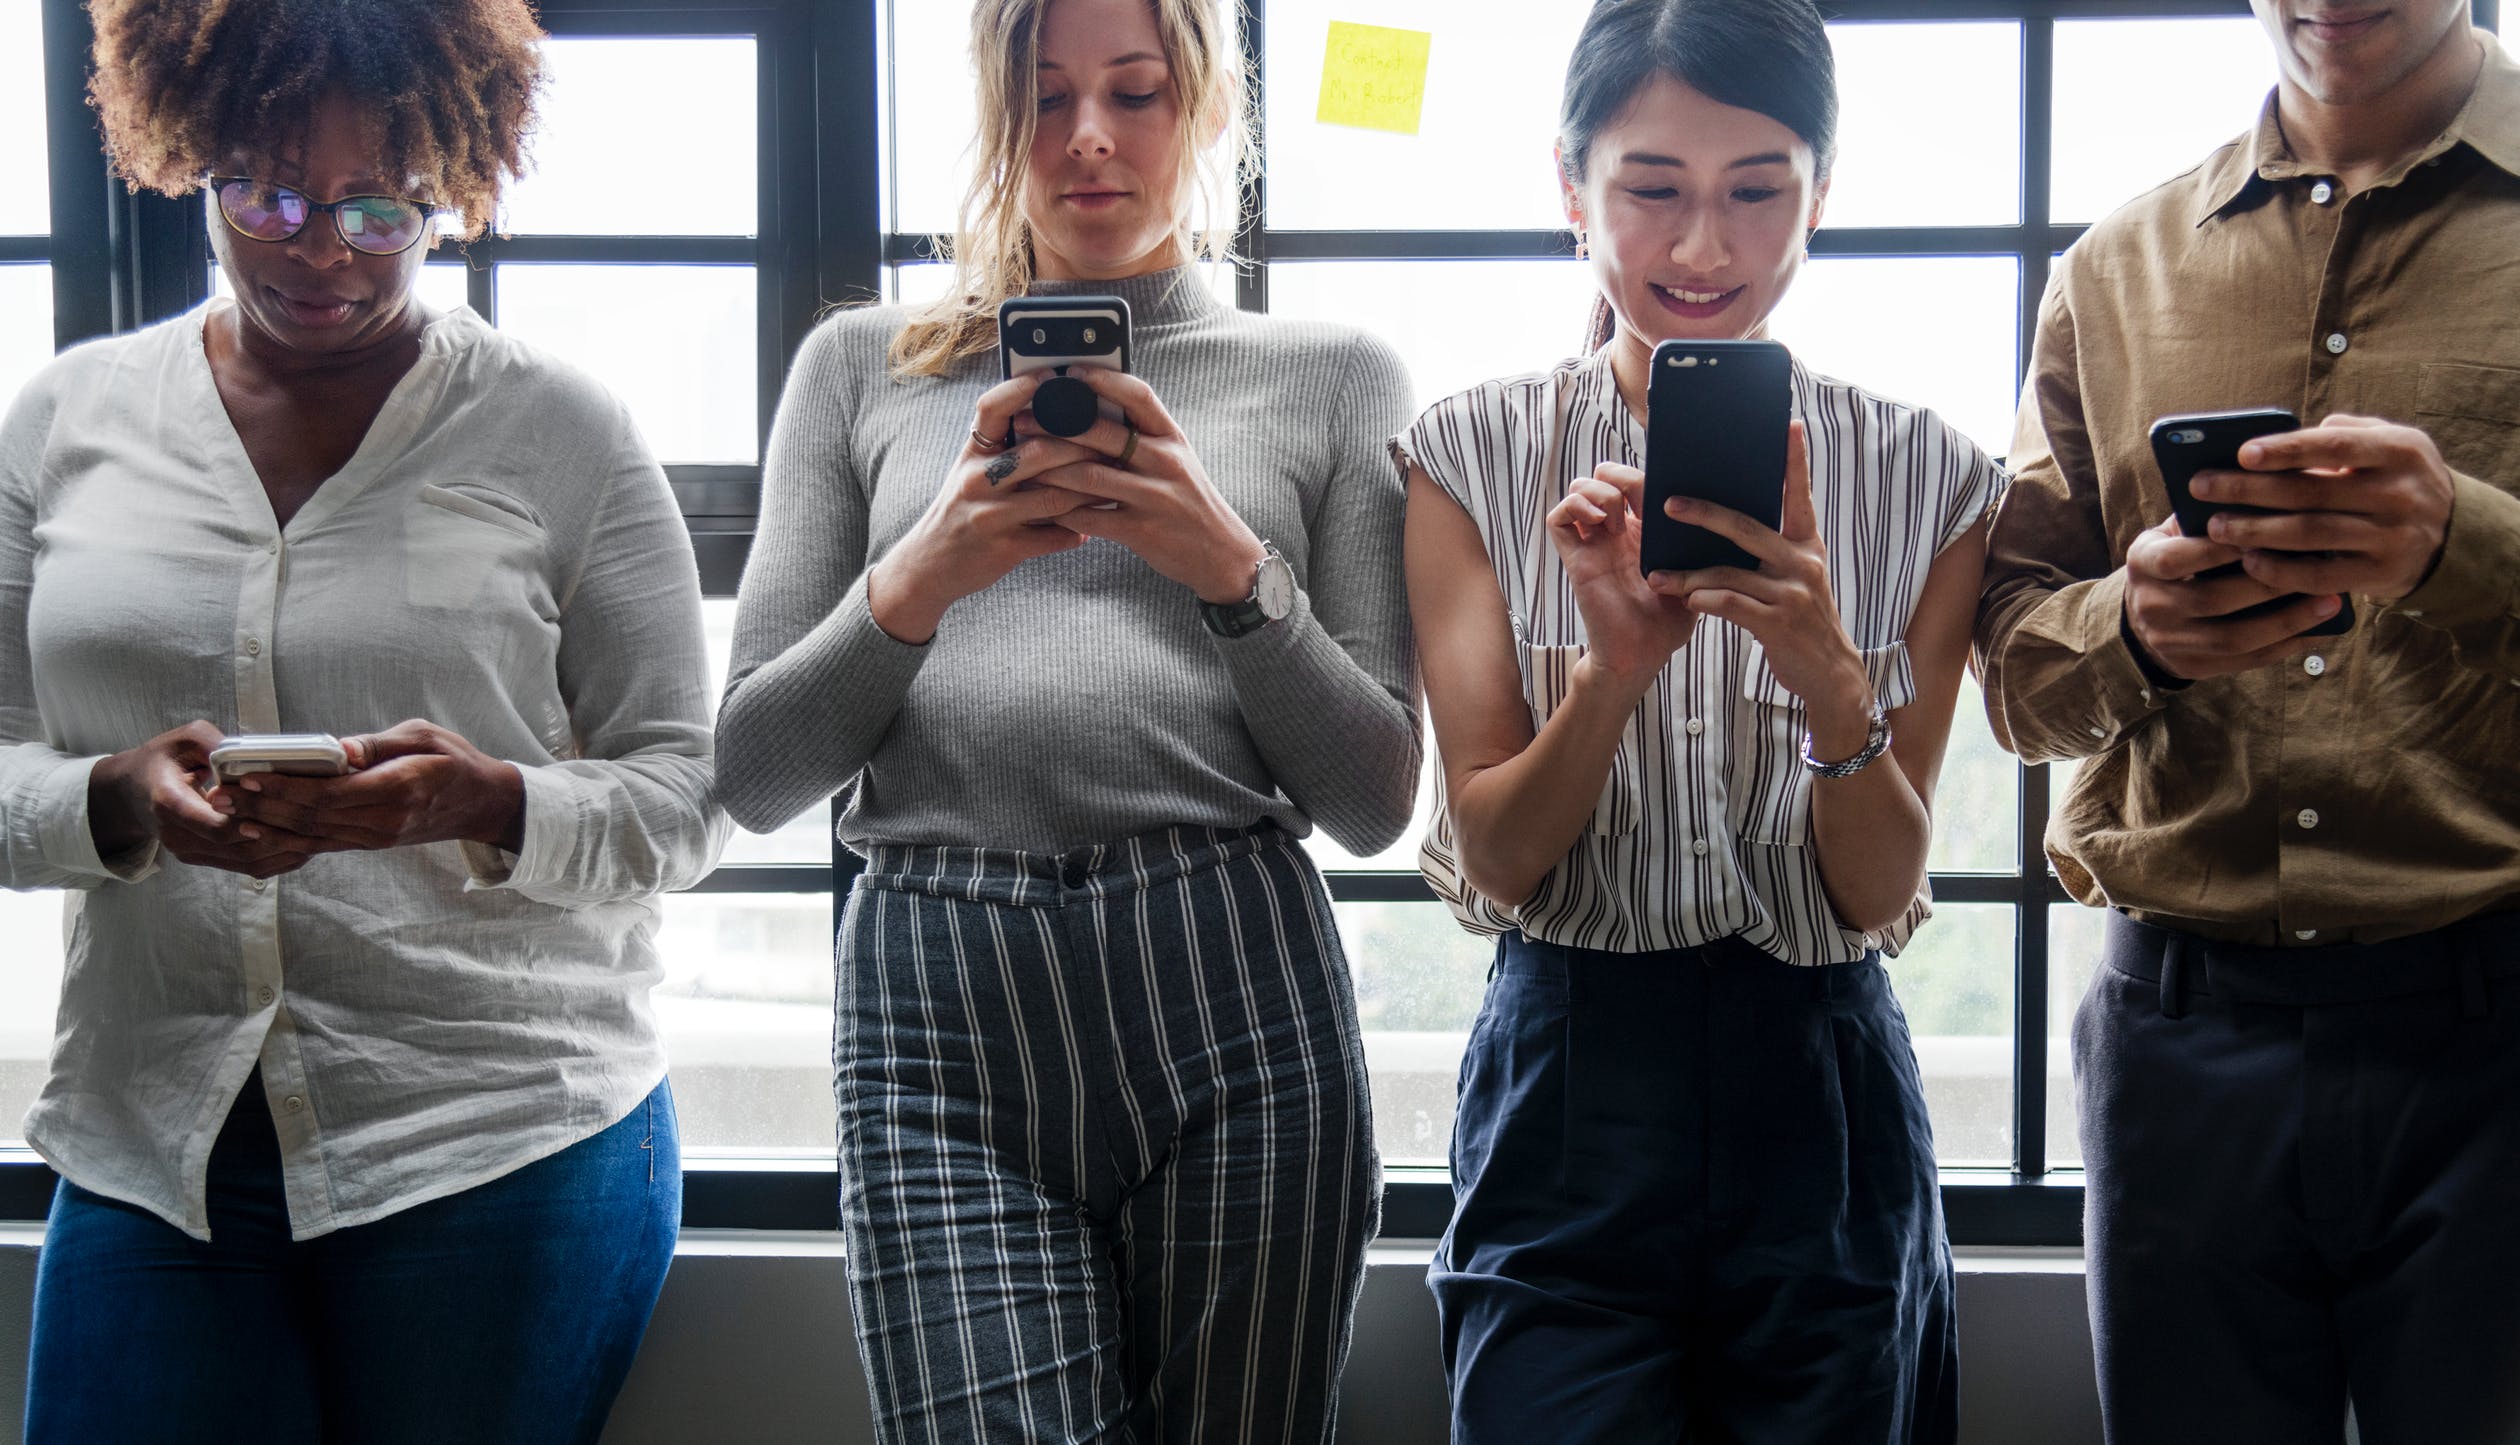 How To Connect With Millennials, Not Just Market To Them